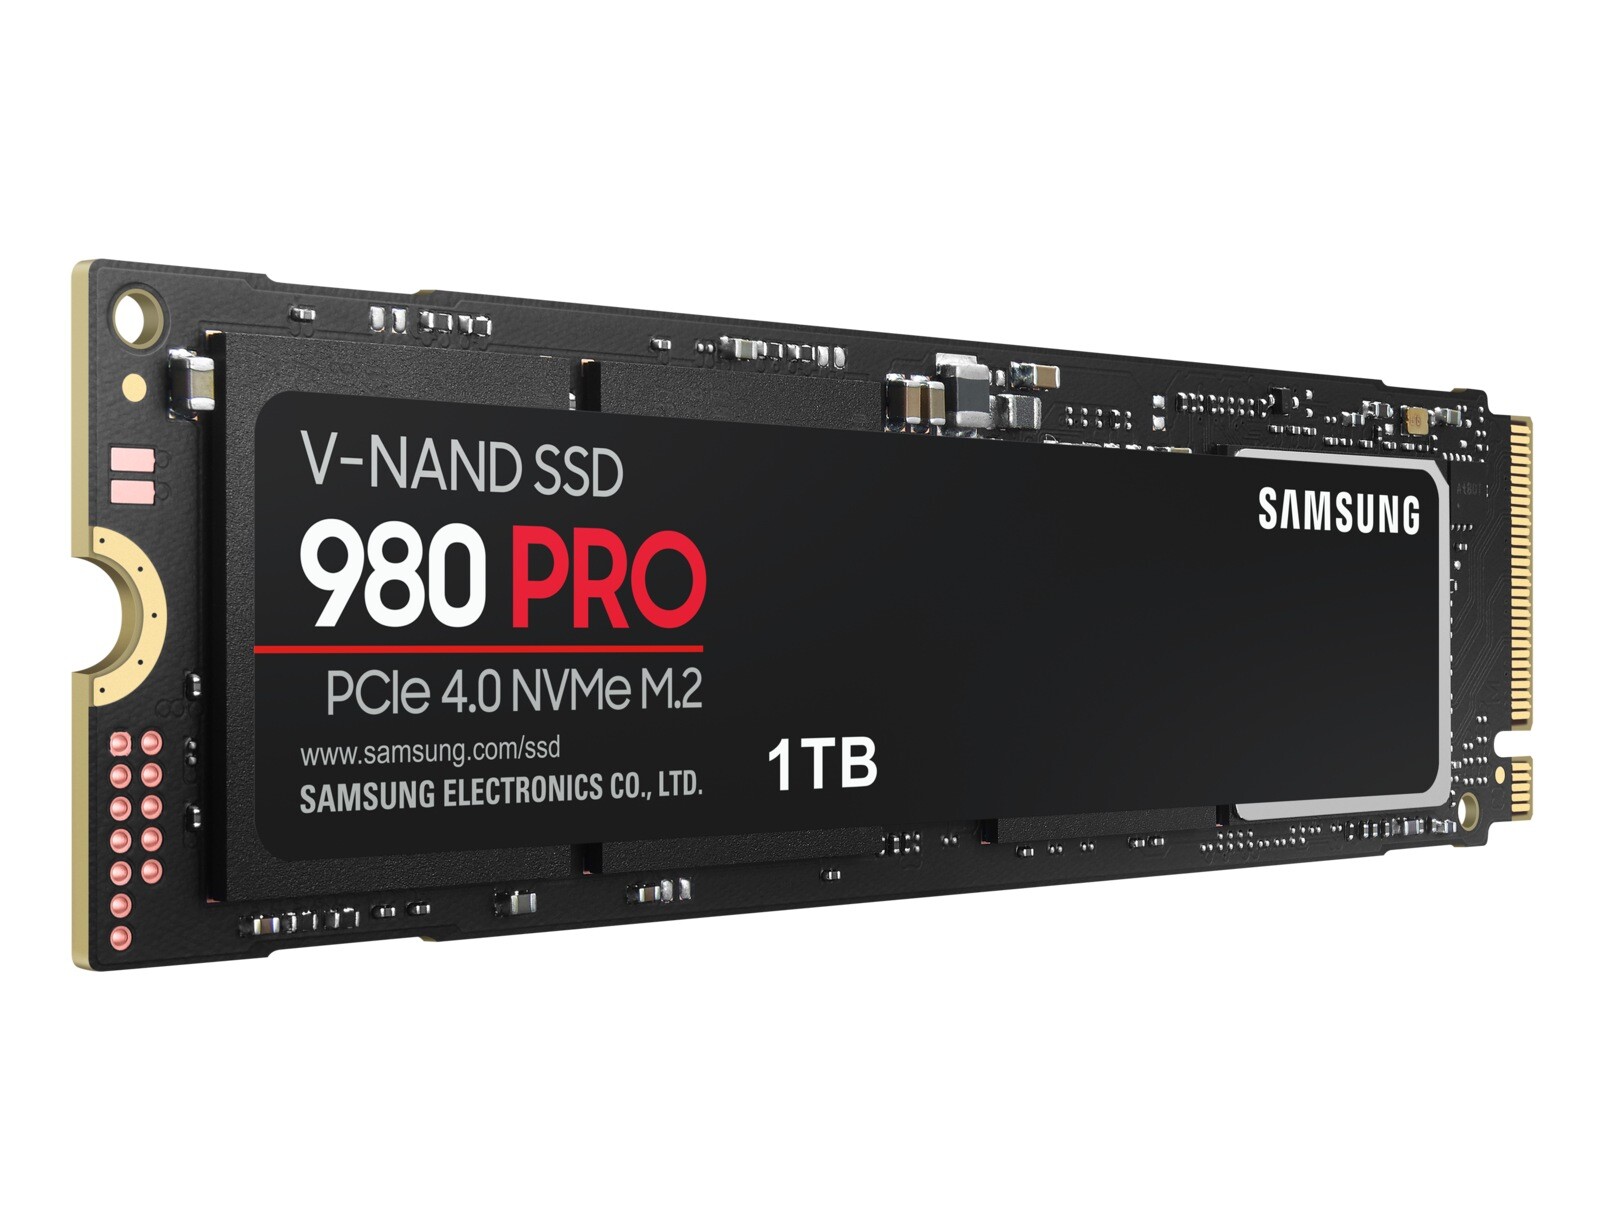 Samsung 980 PRO NVMe SSD NAND Flash with Half Endurance of 970 PRO: Product Page | TechPowerUp Forums